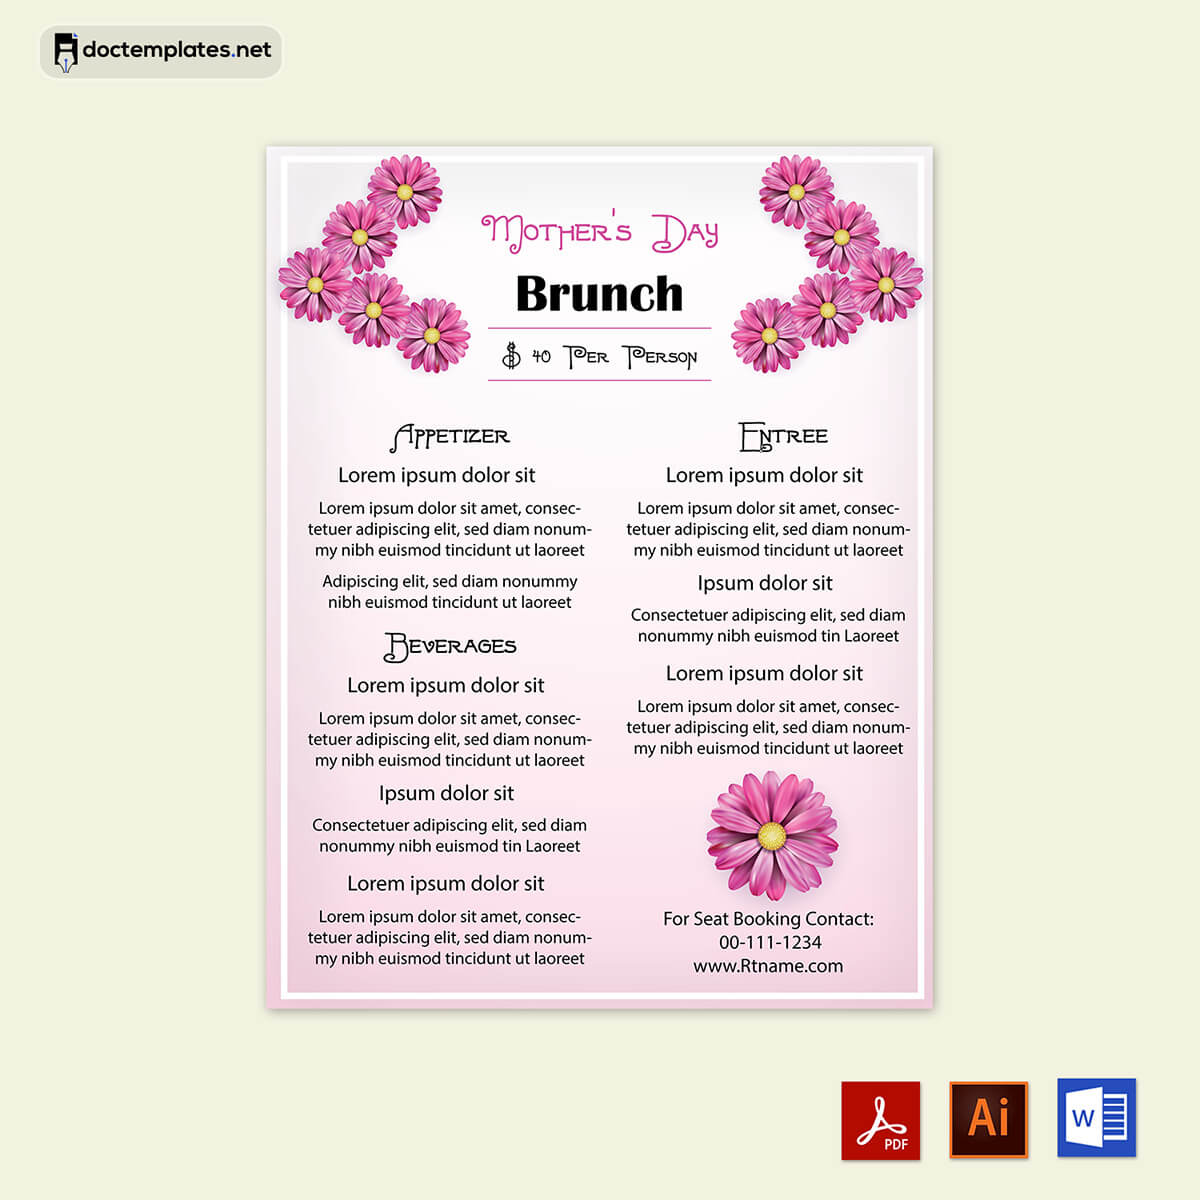 mothers day menu template free
01